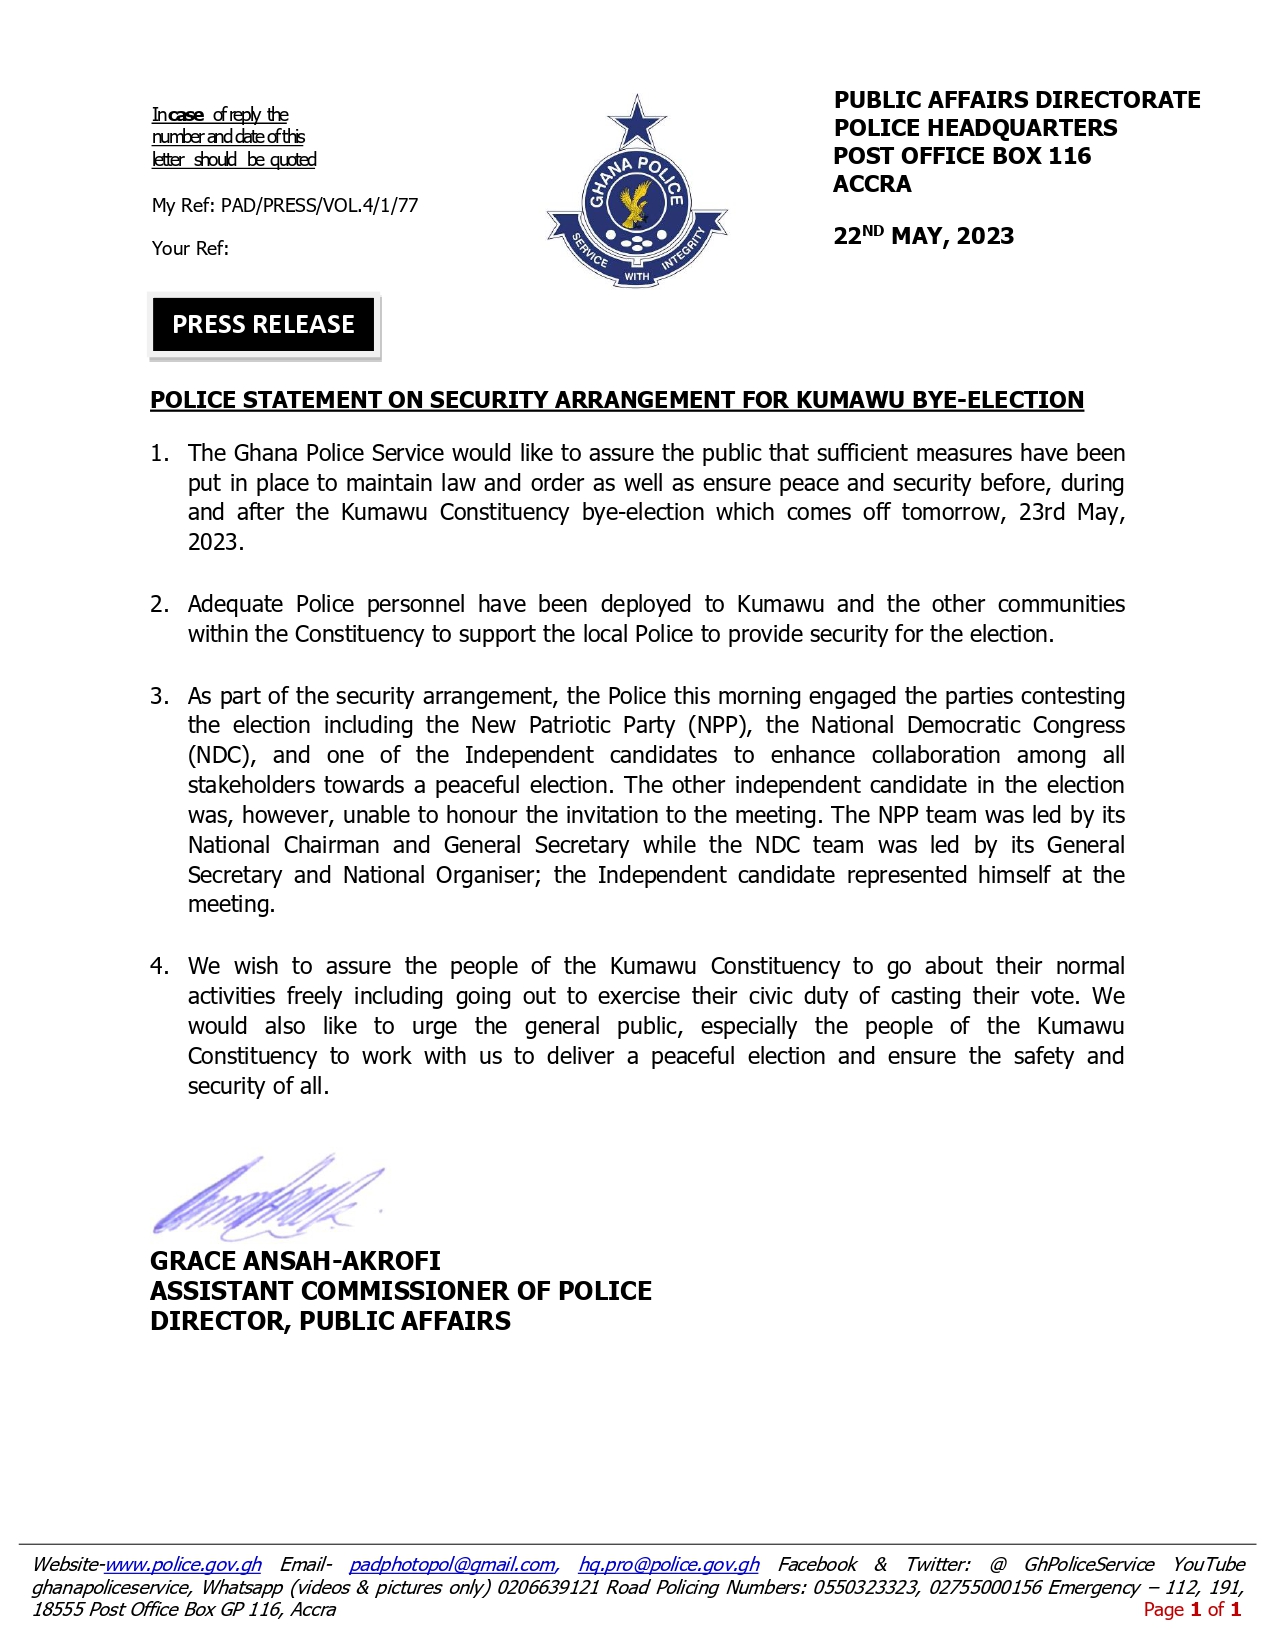 Adequate personnel deployed for Kumawu by-election – Police